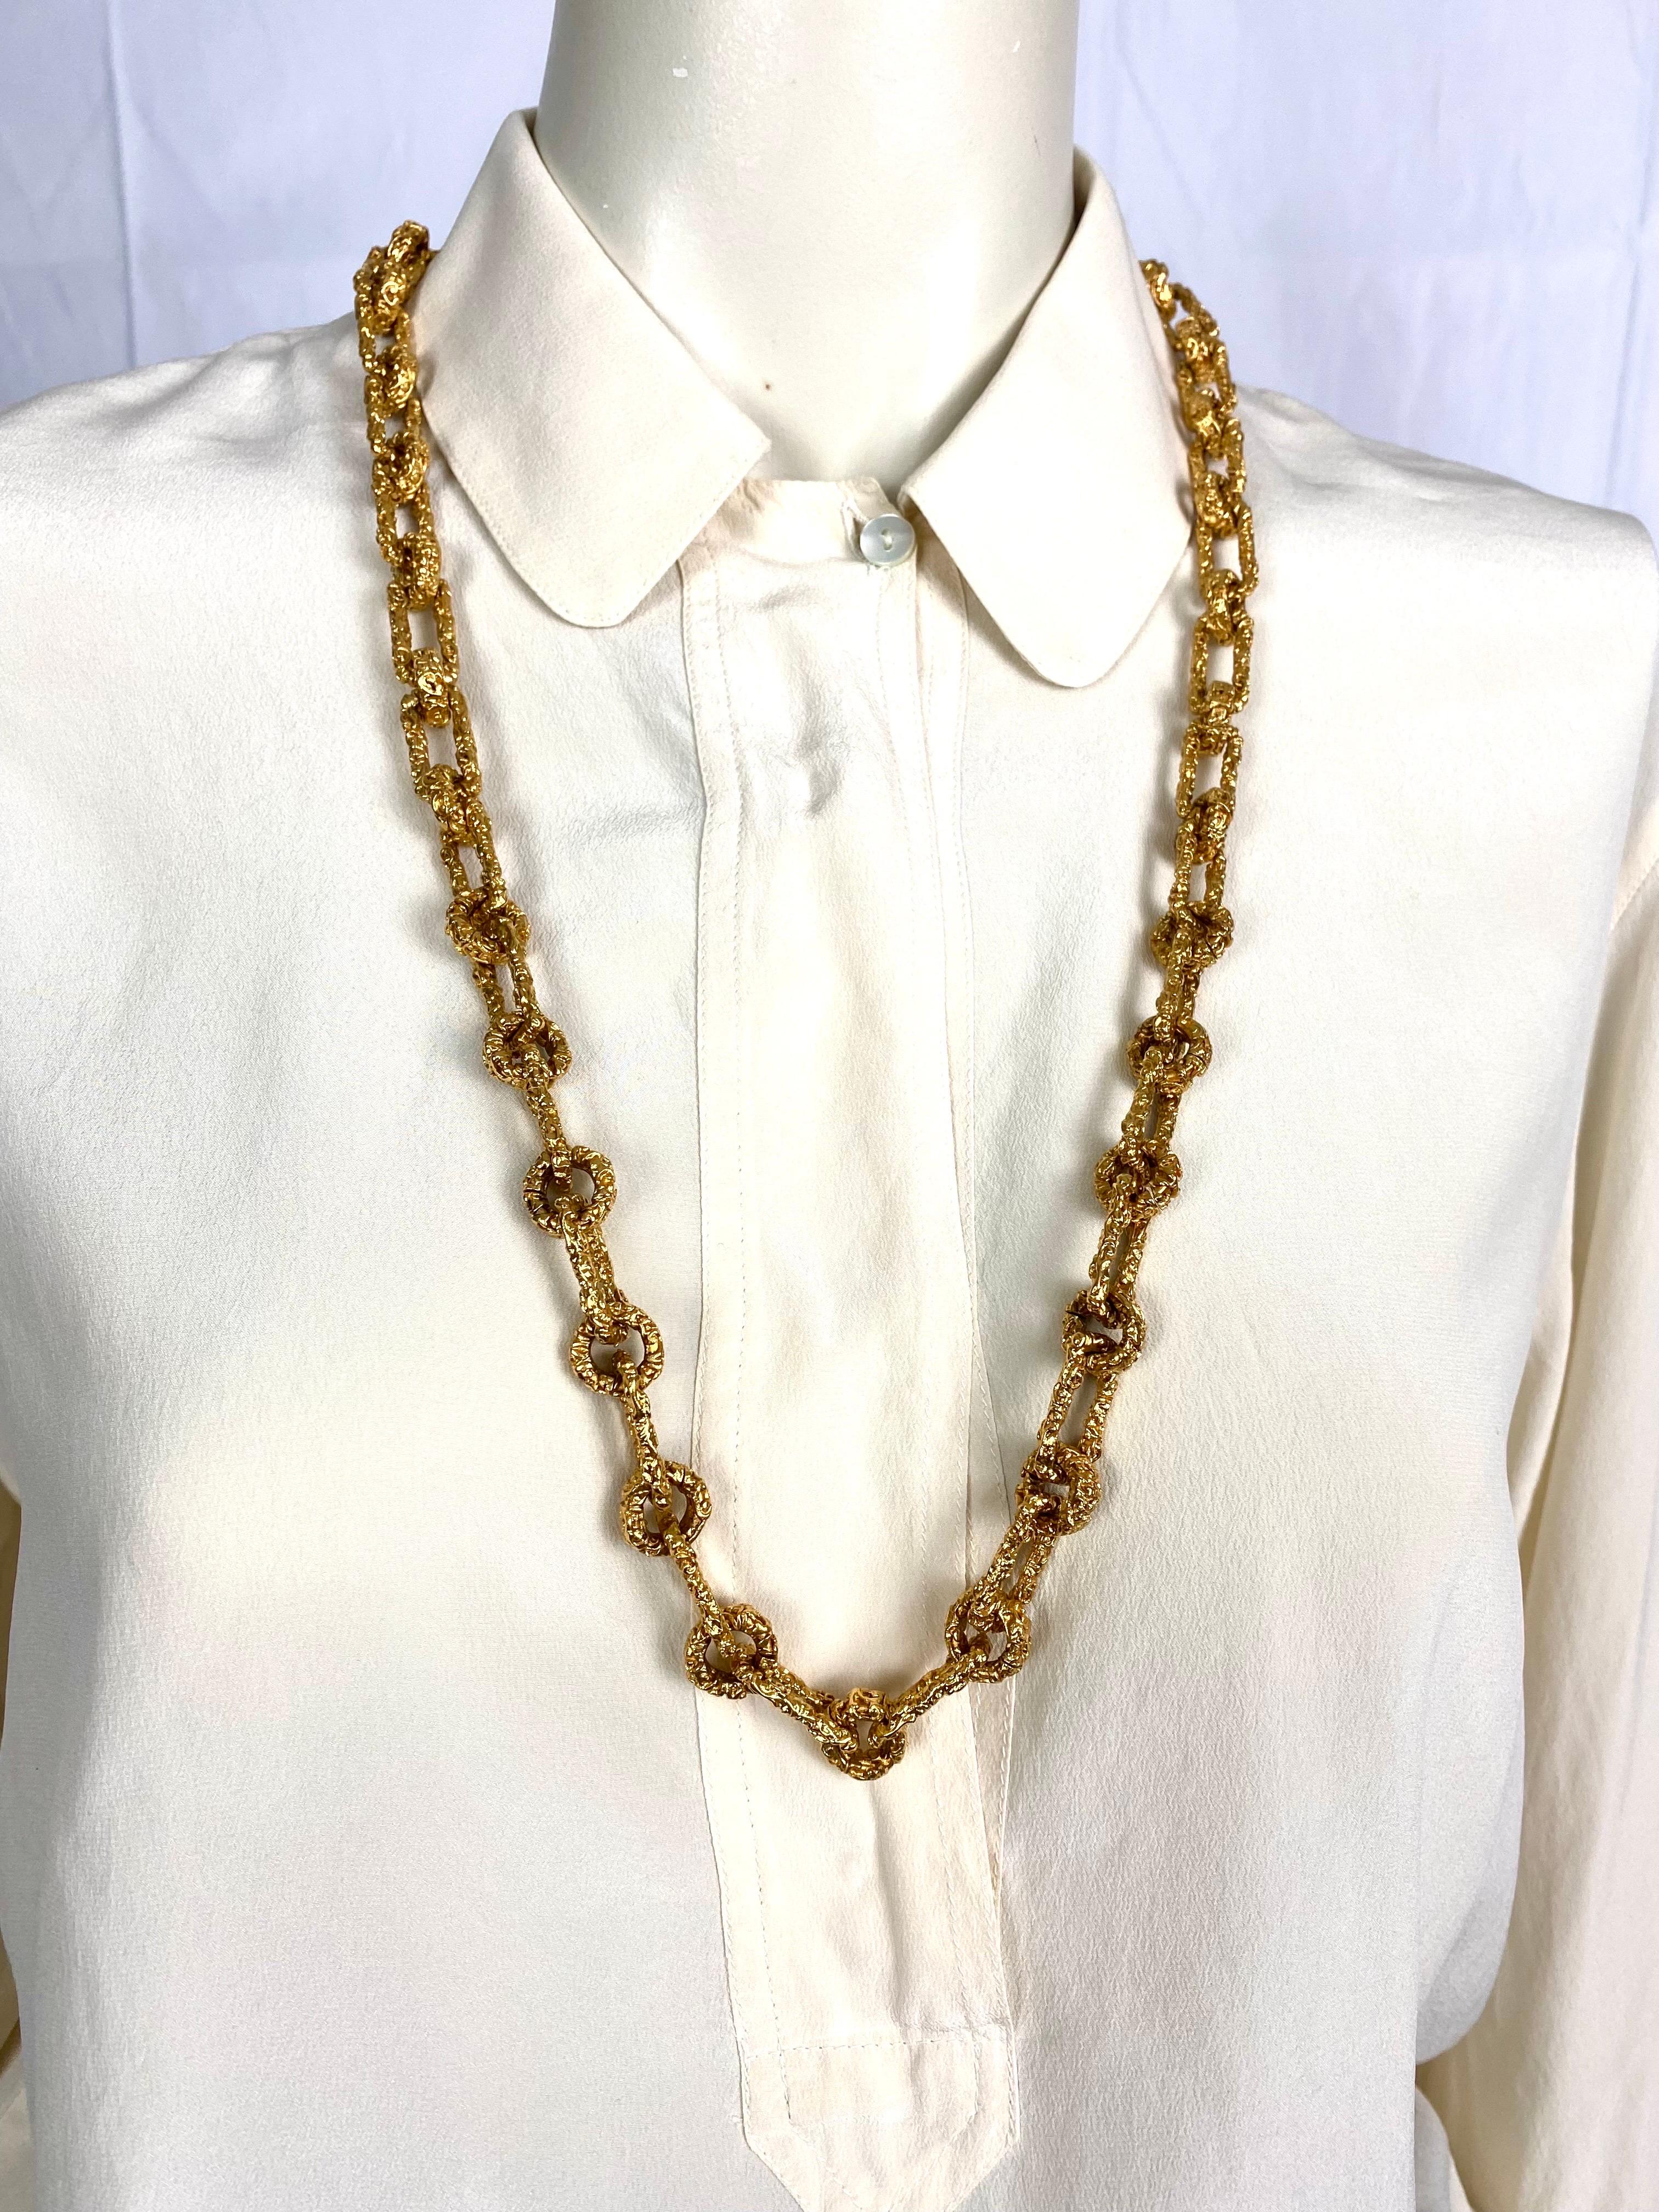 Vintage Chanel necklace from 1990 gold chain textured and intertwined CC pattern 3